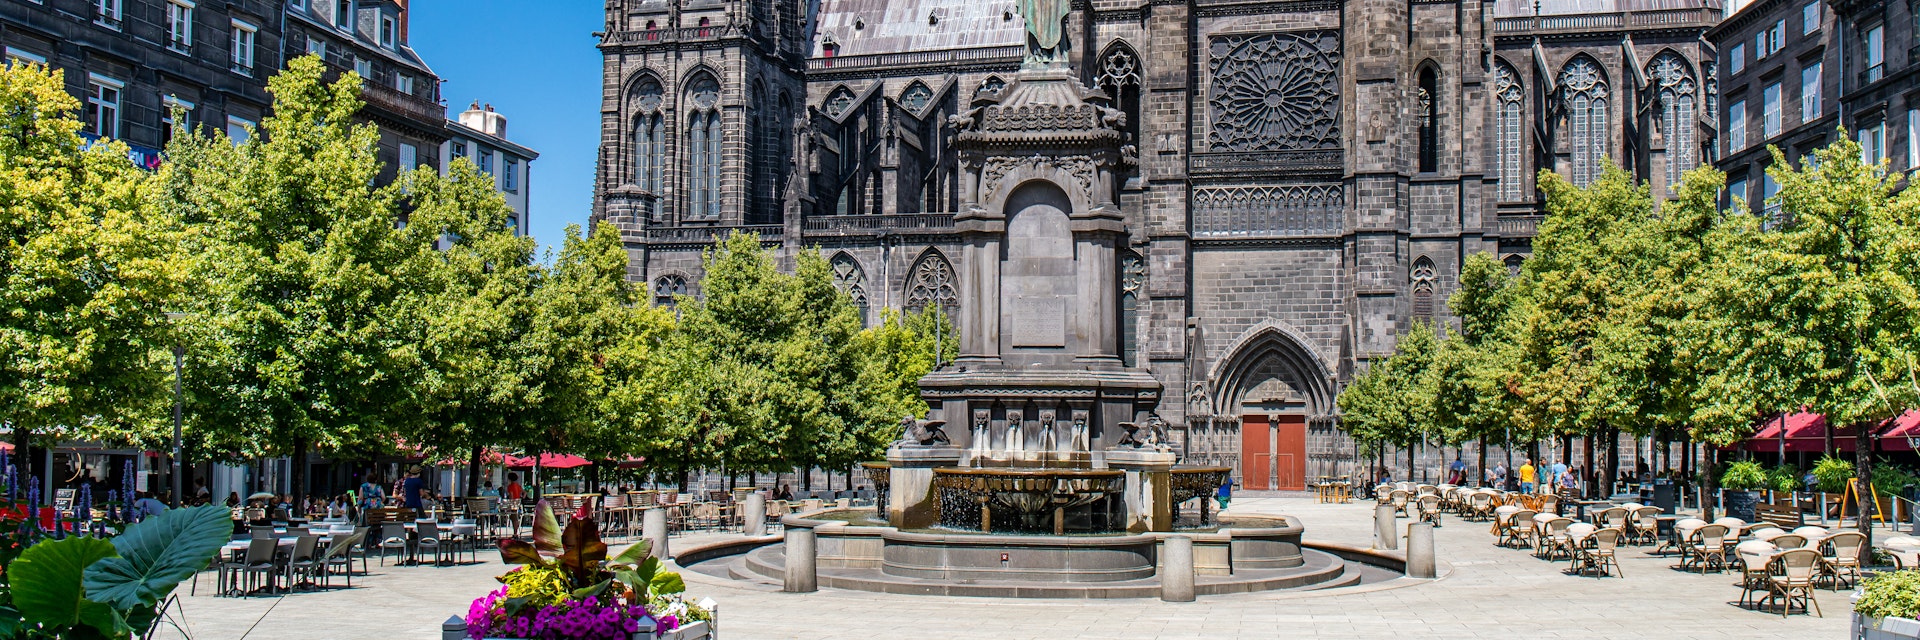 Notre Dame Cathedral in Clermont-Ferrand, France.